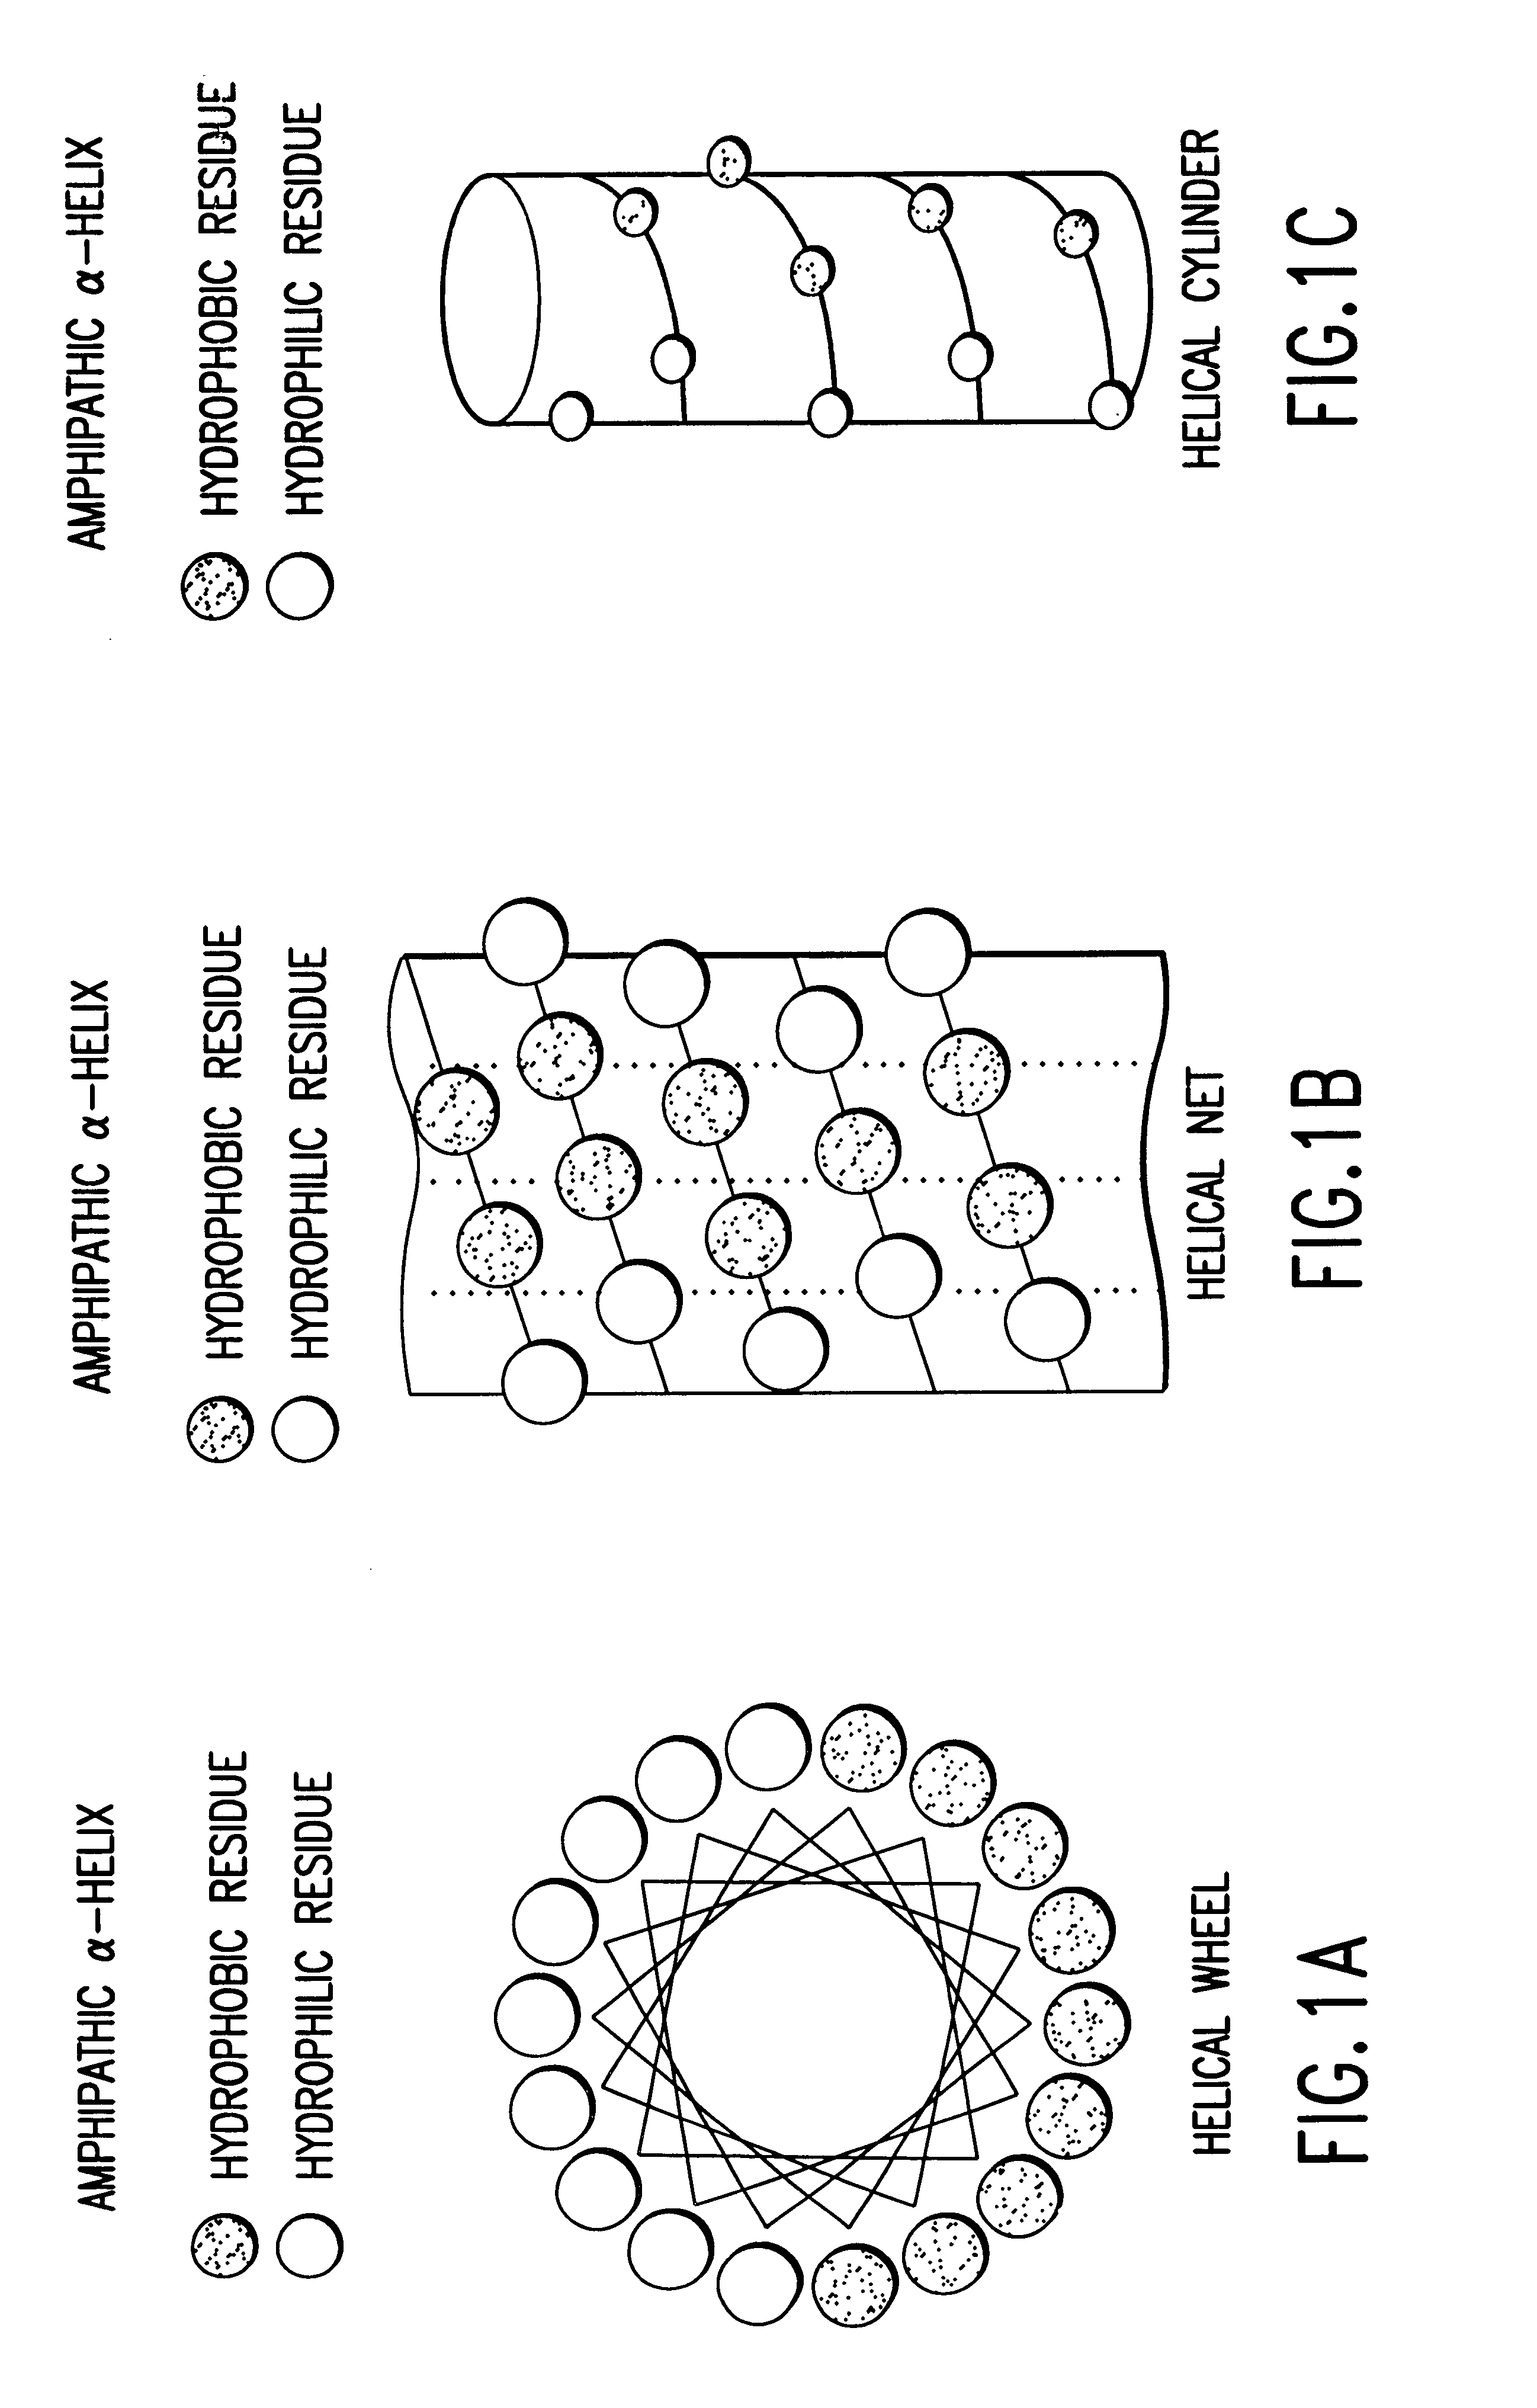 Apolipoprotein A-I agonist compounds